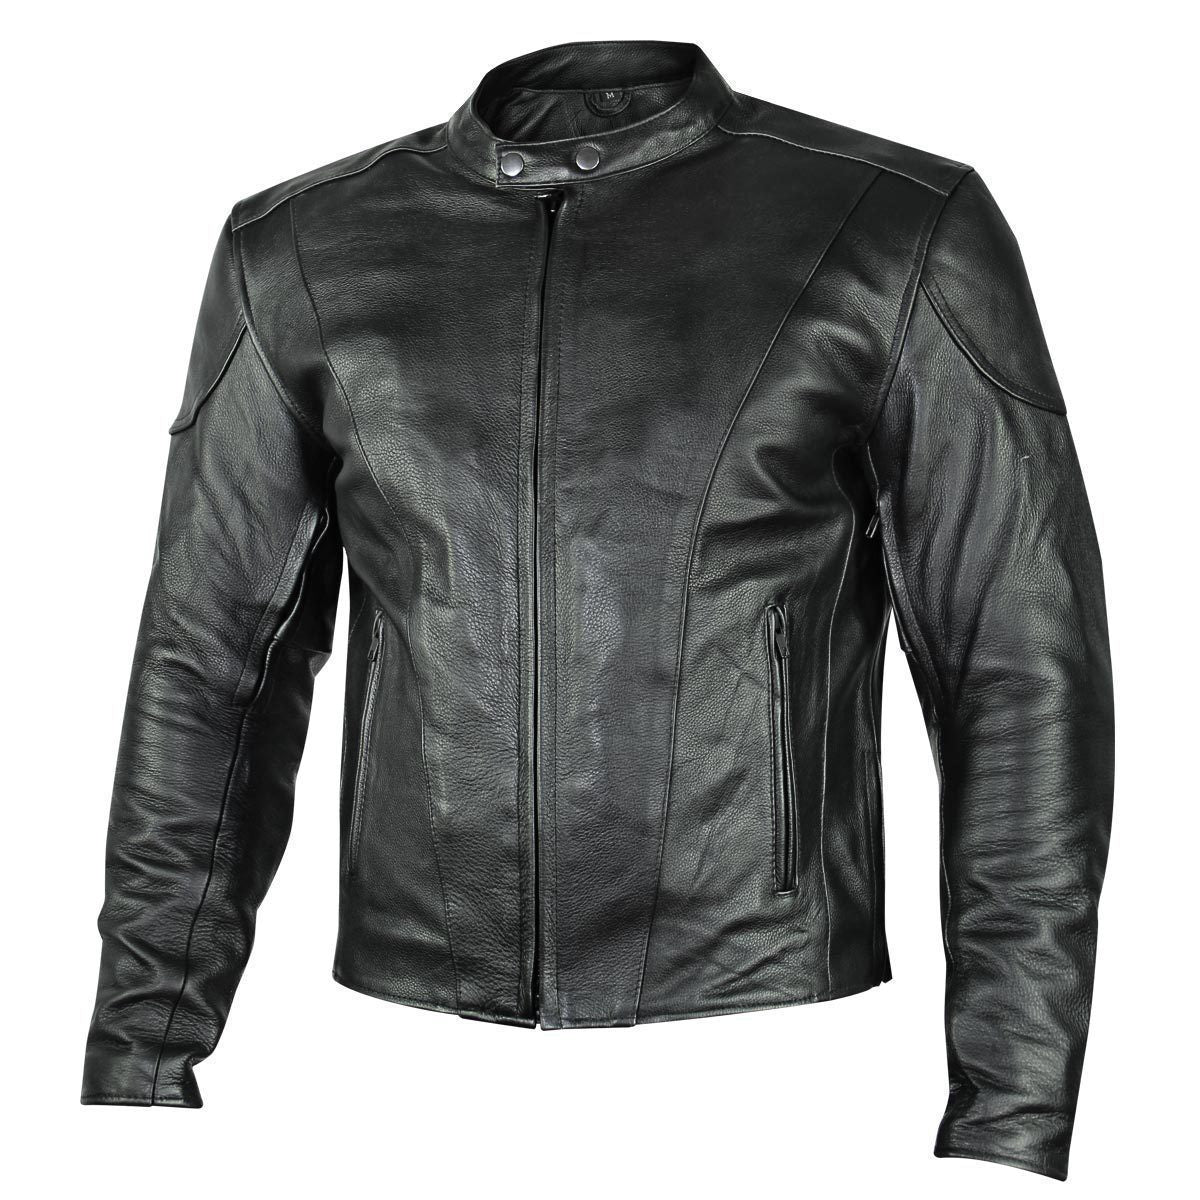 Xelement B7209 'Renegade' Men's Black Leather Motorcycle Jacket with